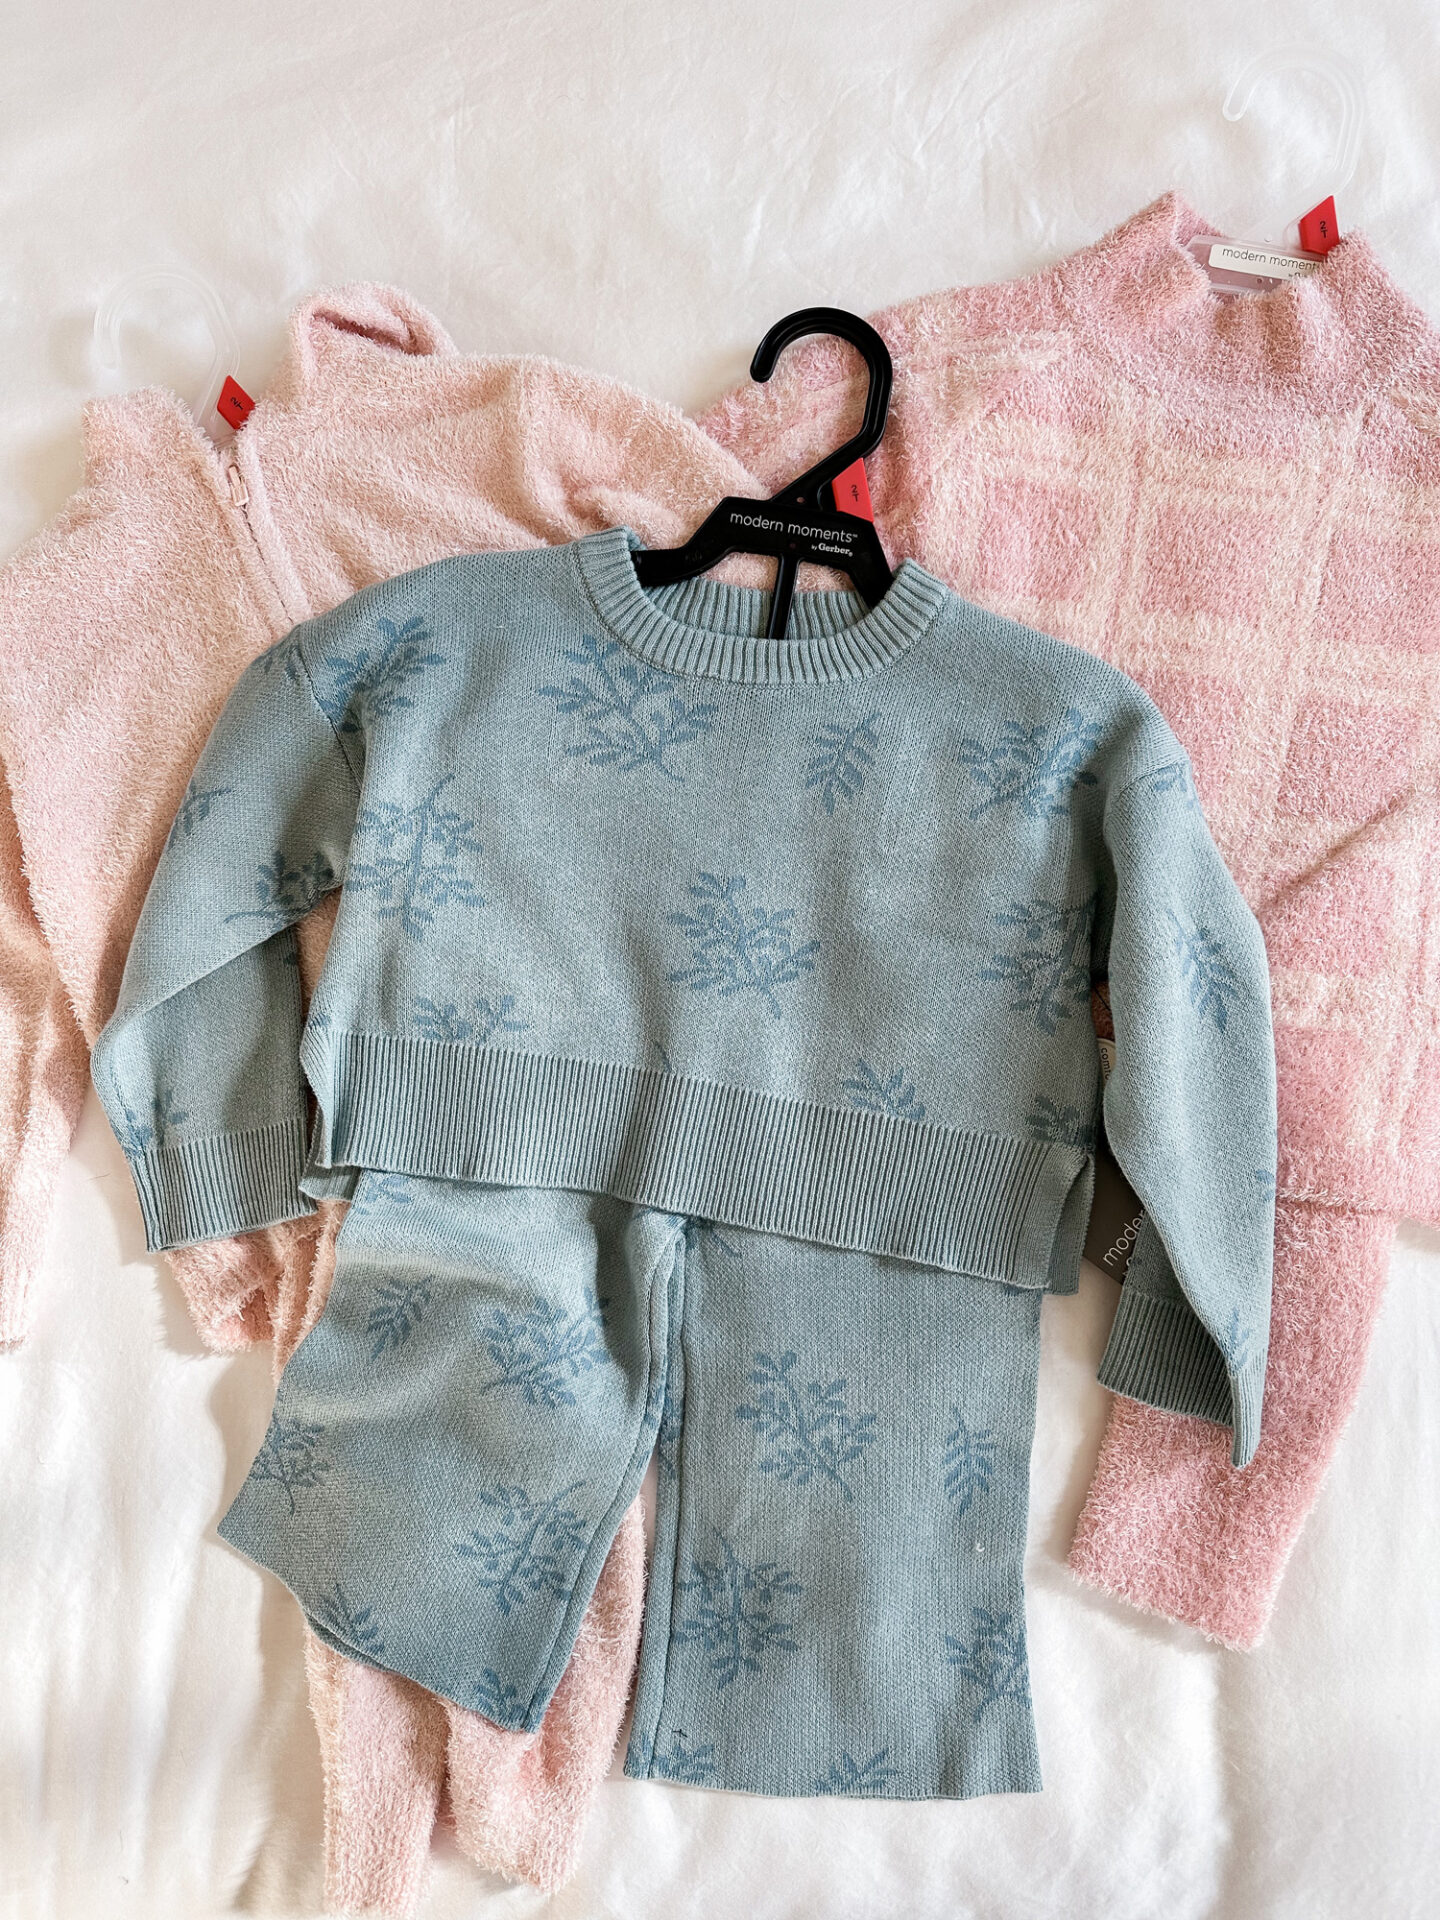 Toddler Girls Clothes from Walmart // Glitter & Gingham 